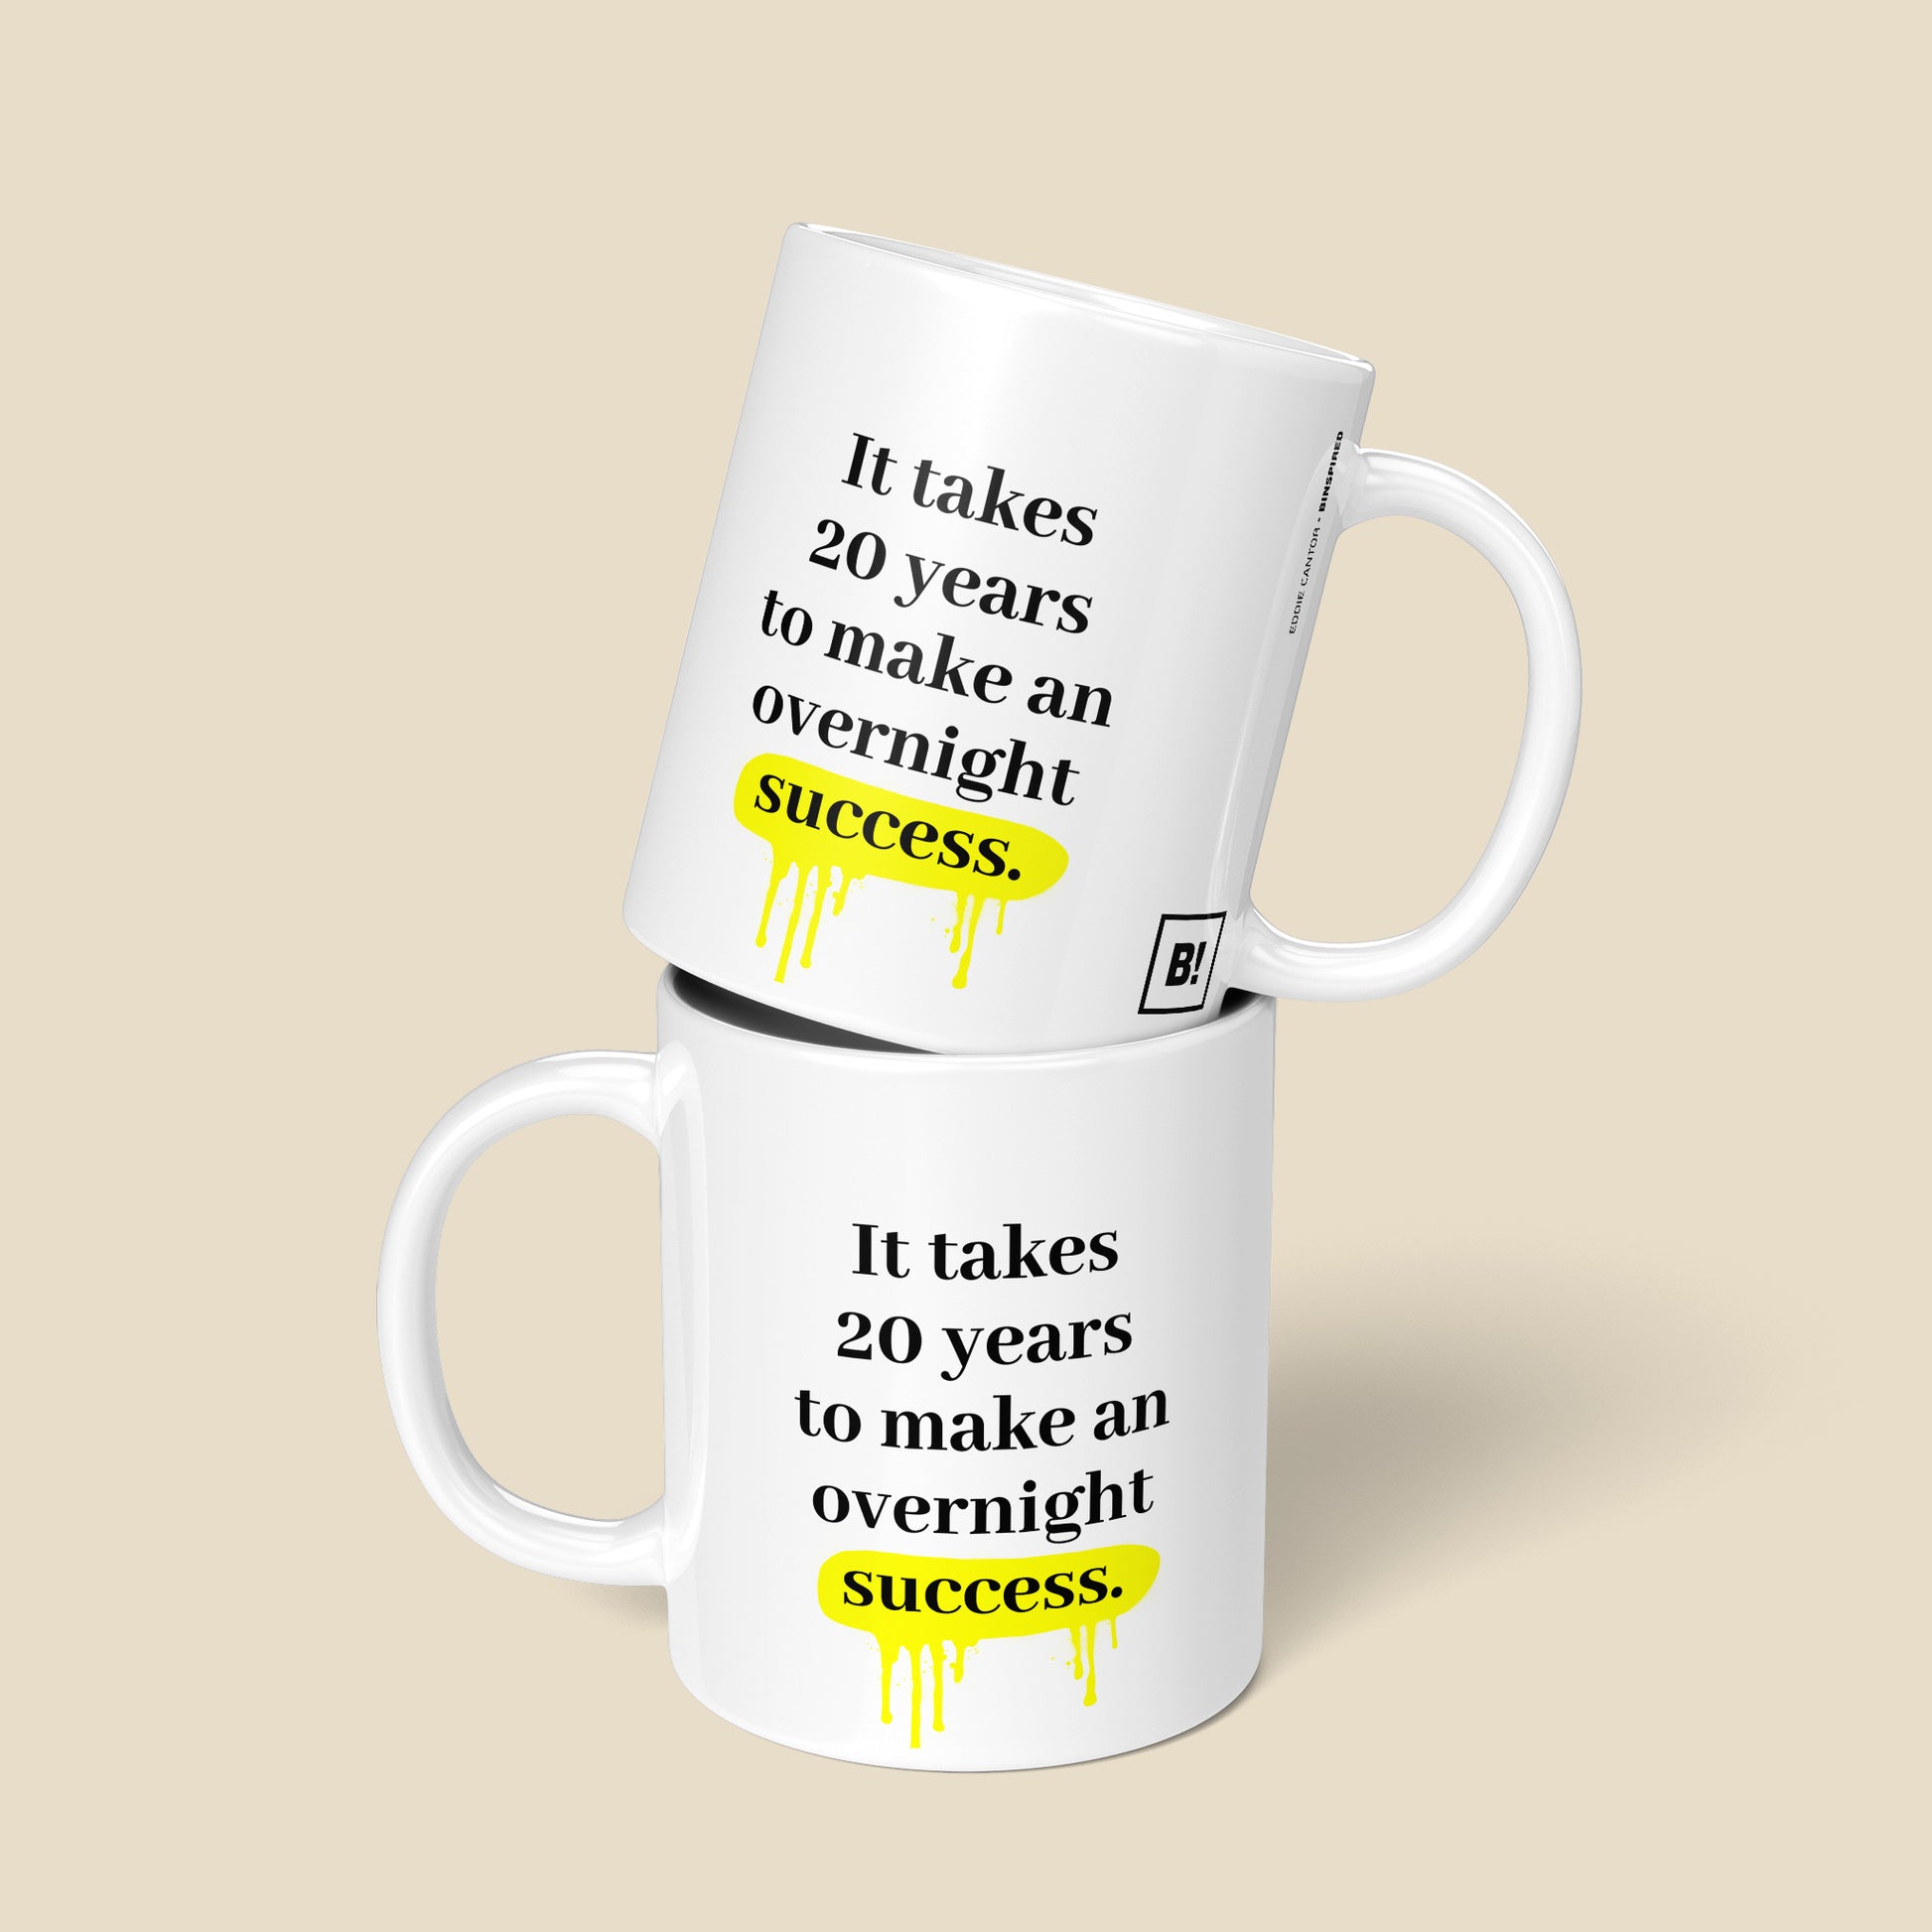 Be inspired by Eddie Cantor's famous quote, "It takes 20 years to make an overnight success" on this 11oz white glossy coffee mug with a front and back view.